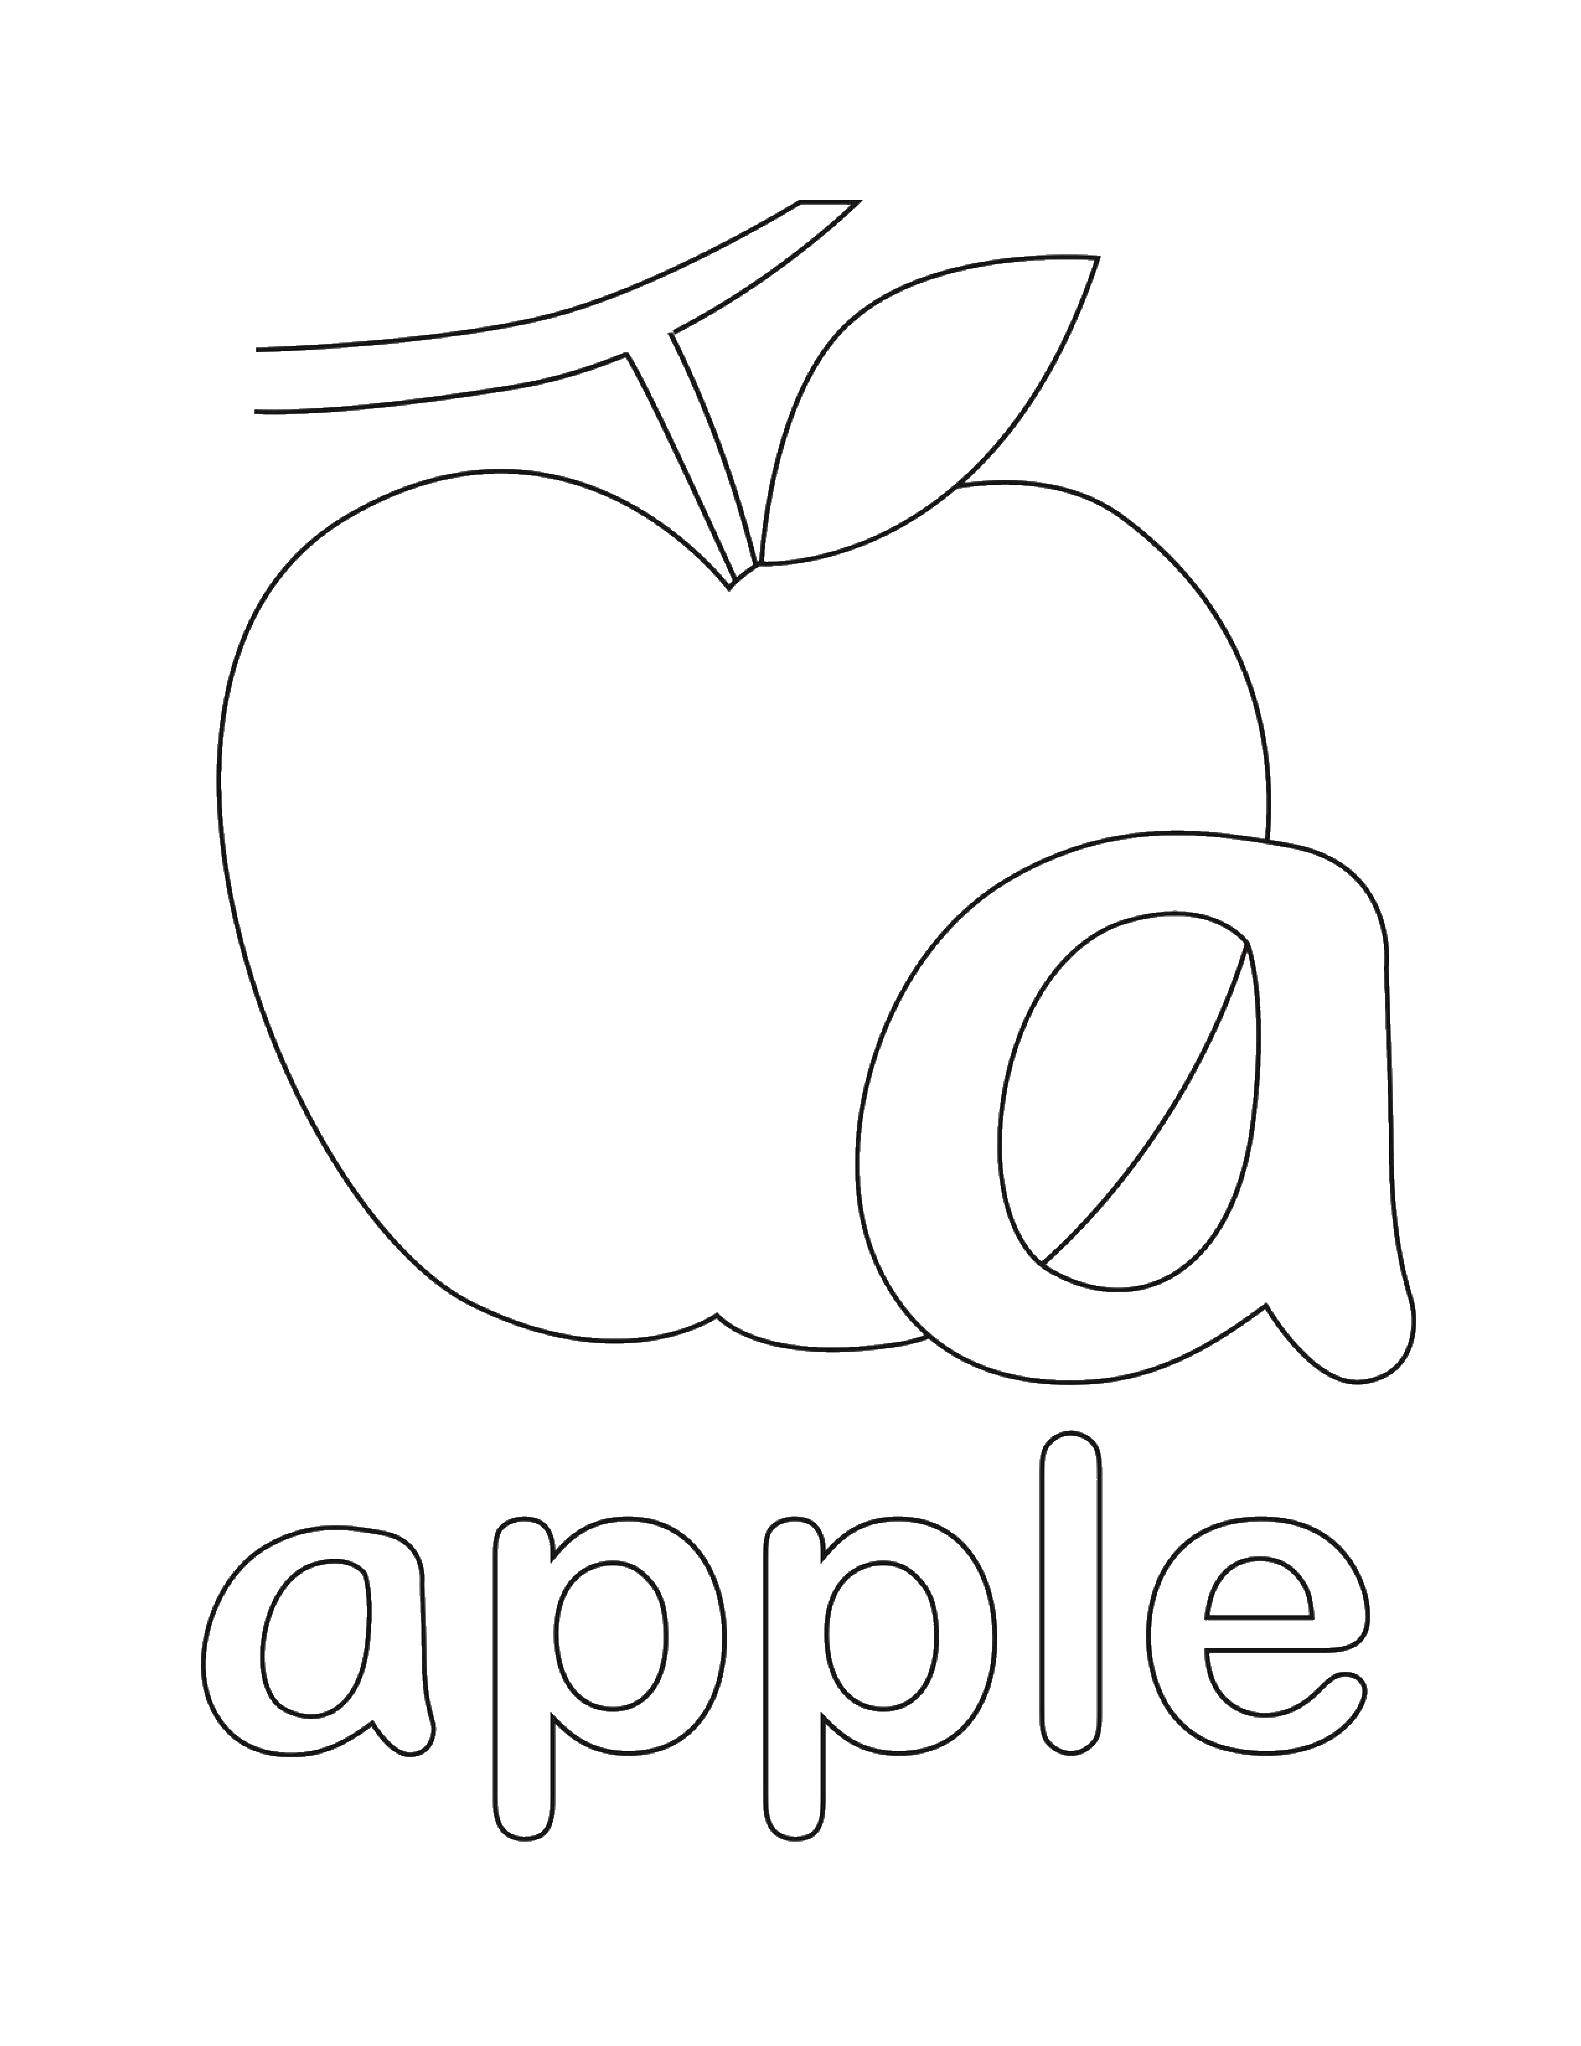 Coloring Apple. Category English words. Tags:  the English word, Apple.